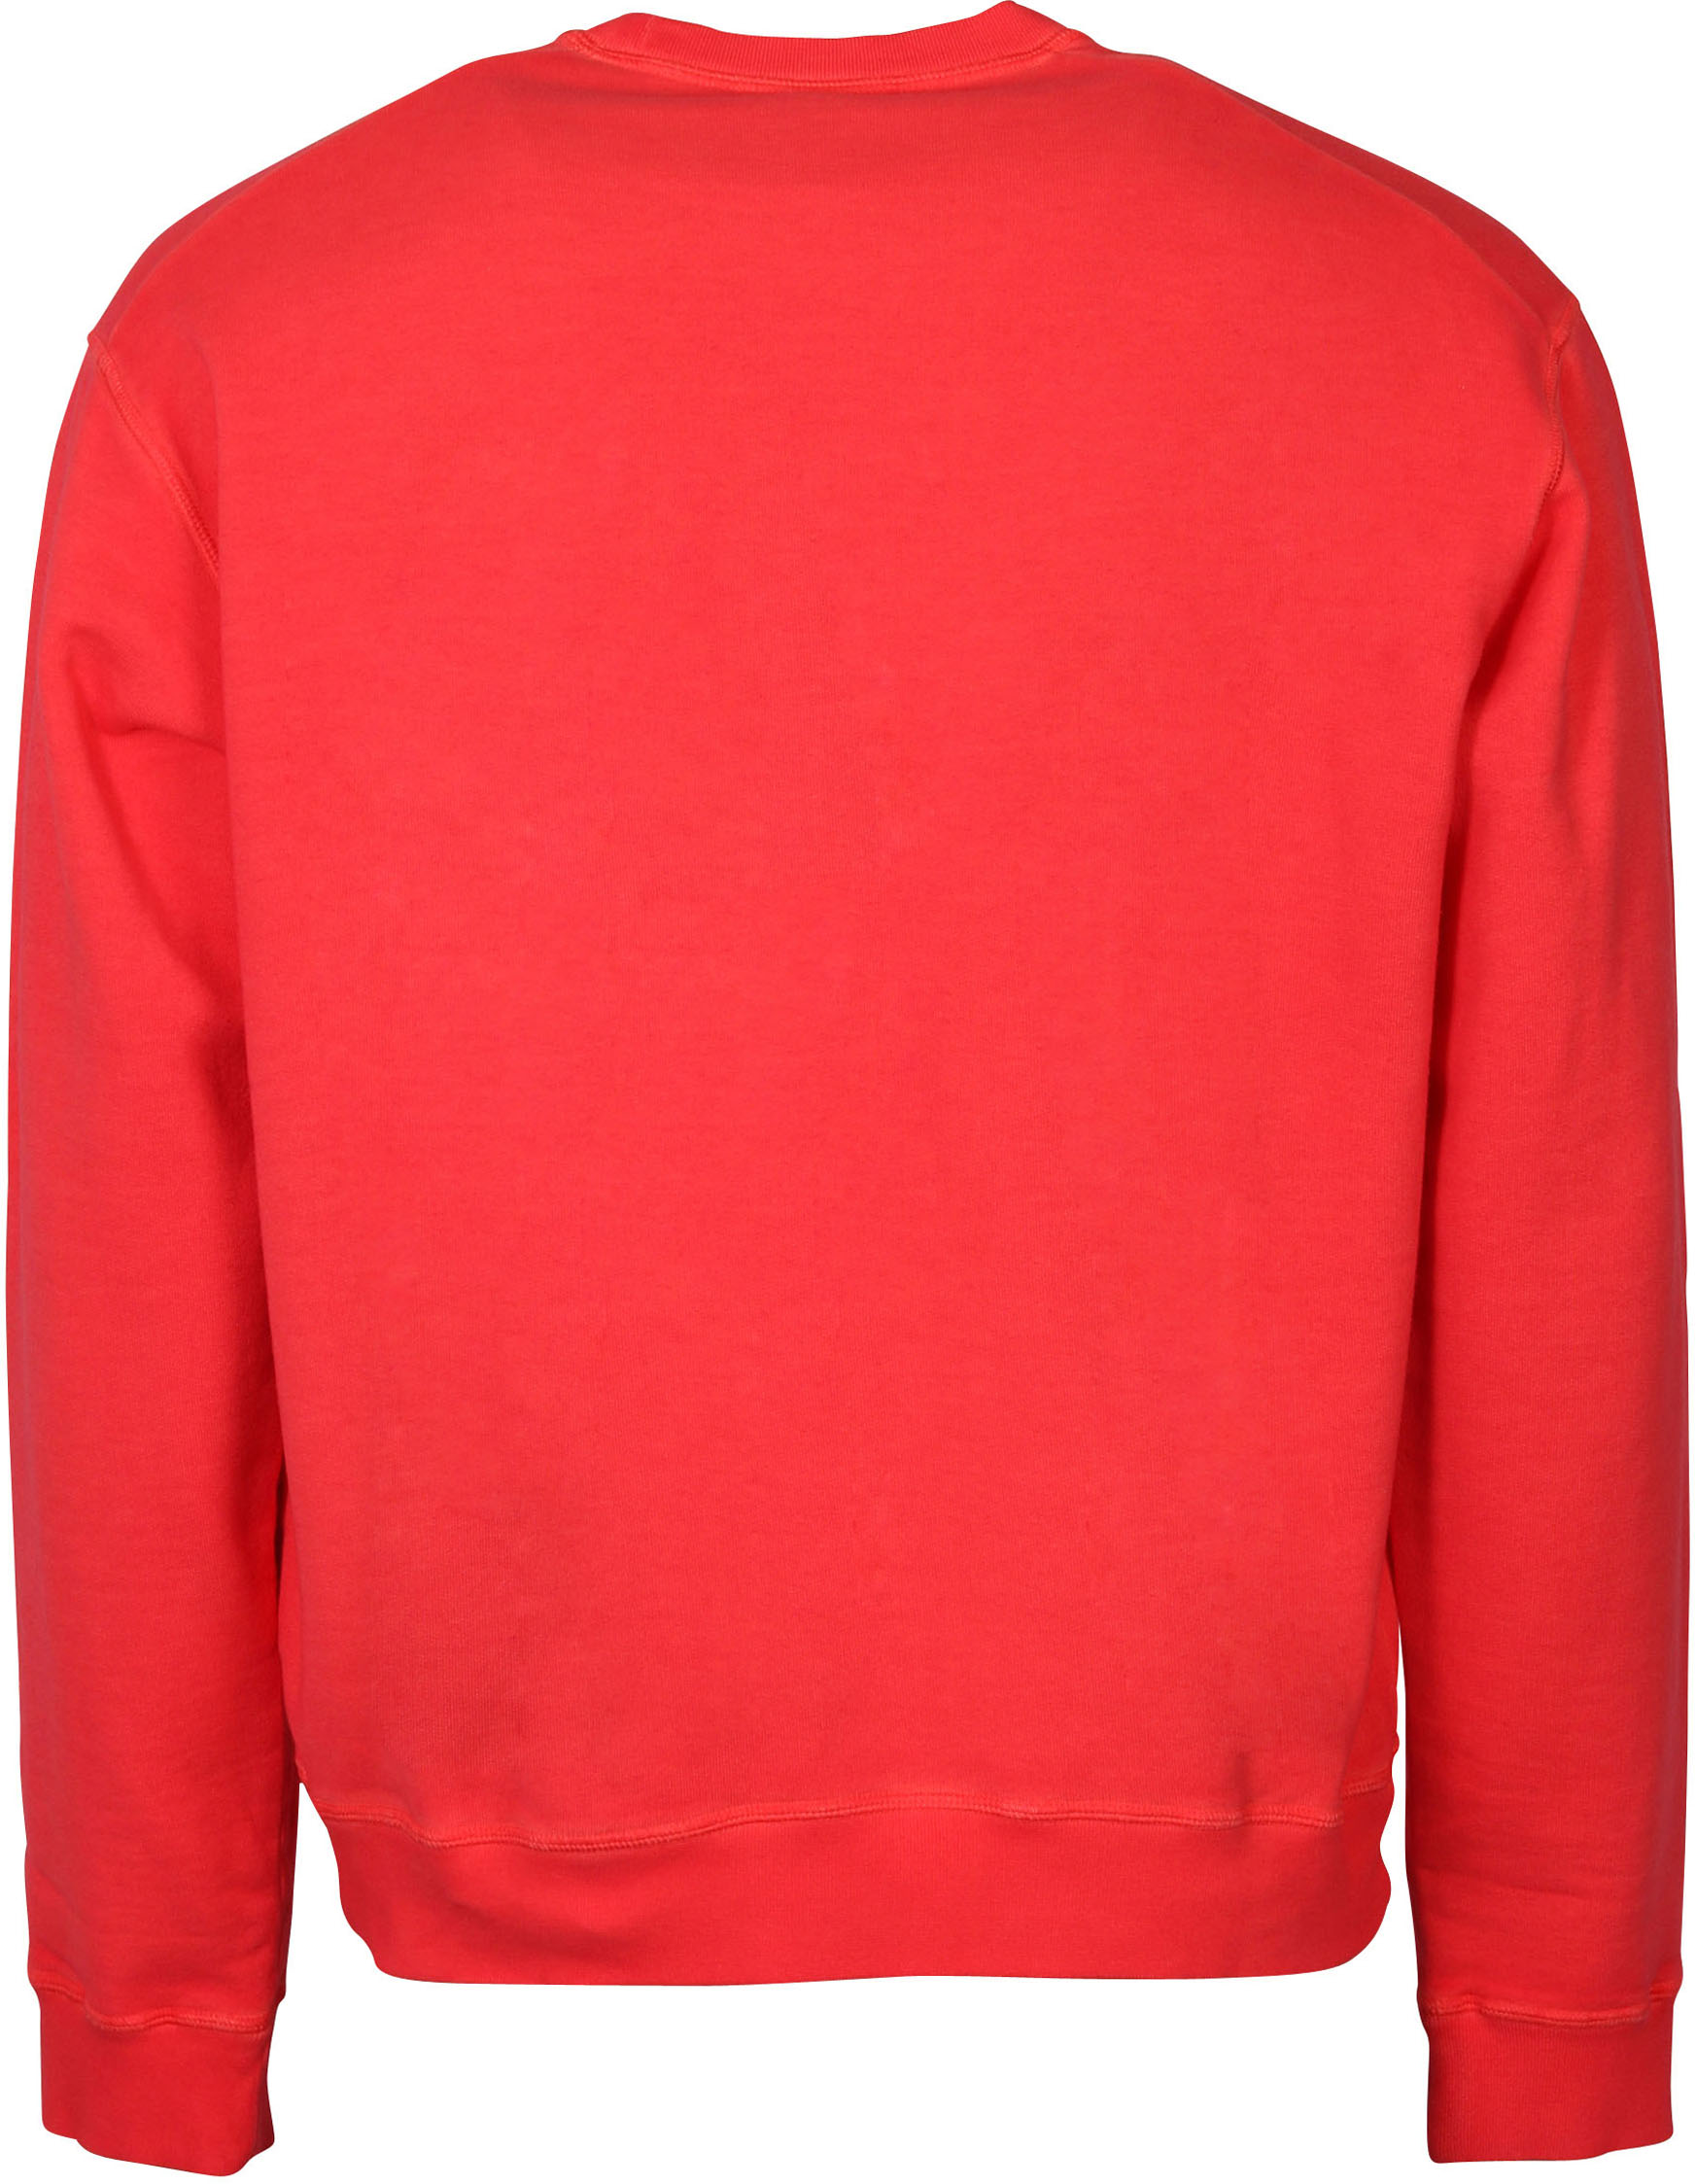 Dsquared Sweatshirt Coral Red Printed S